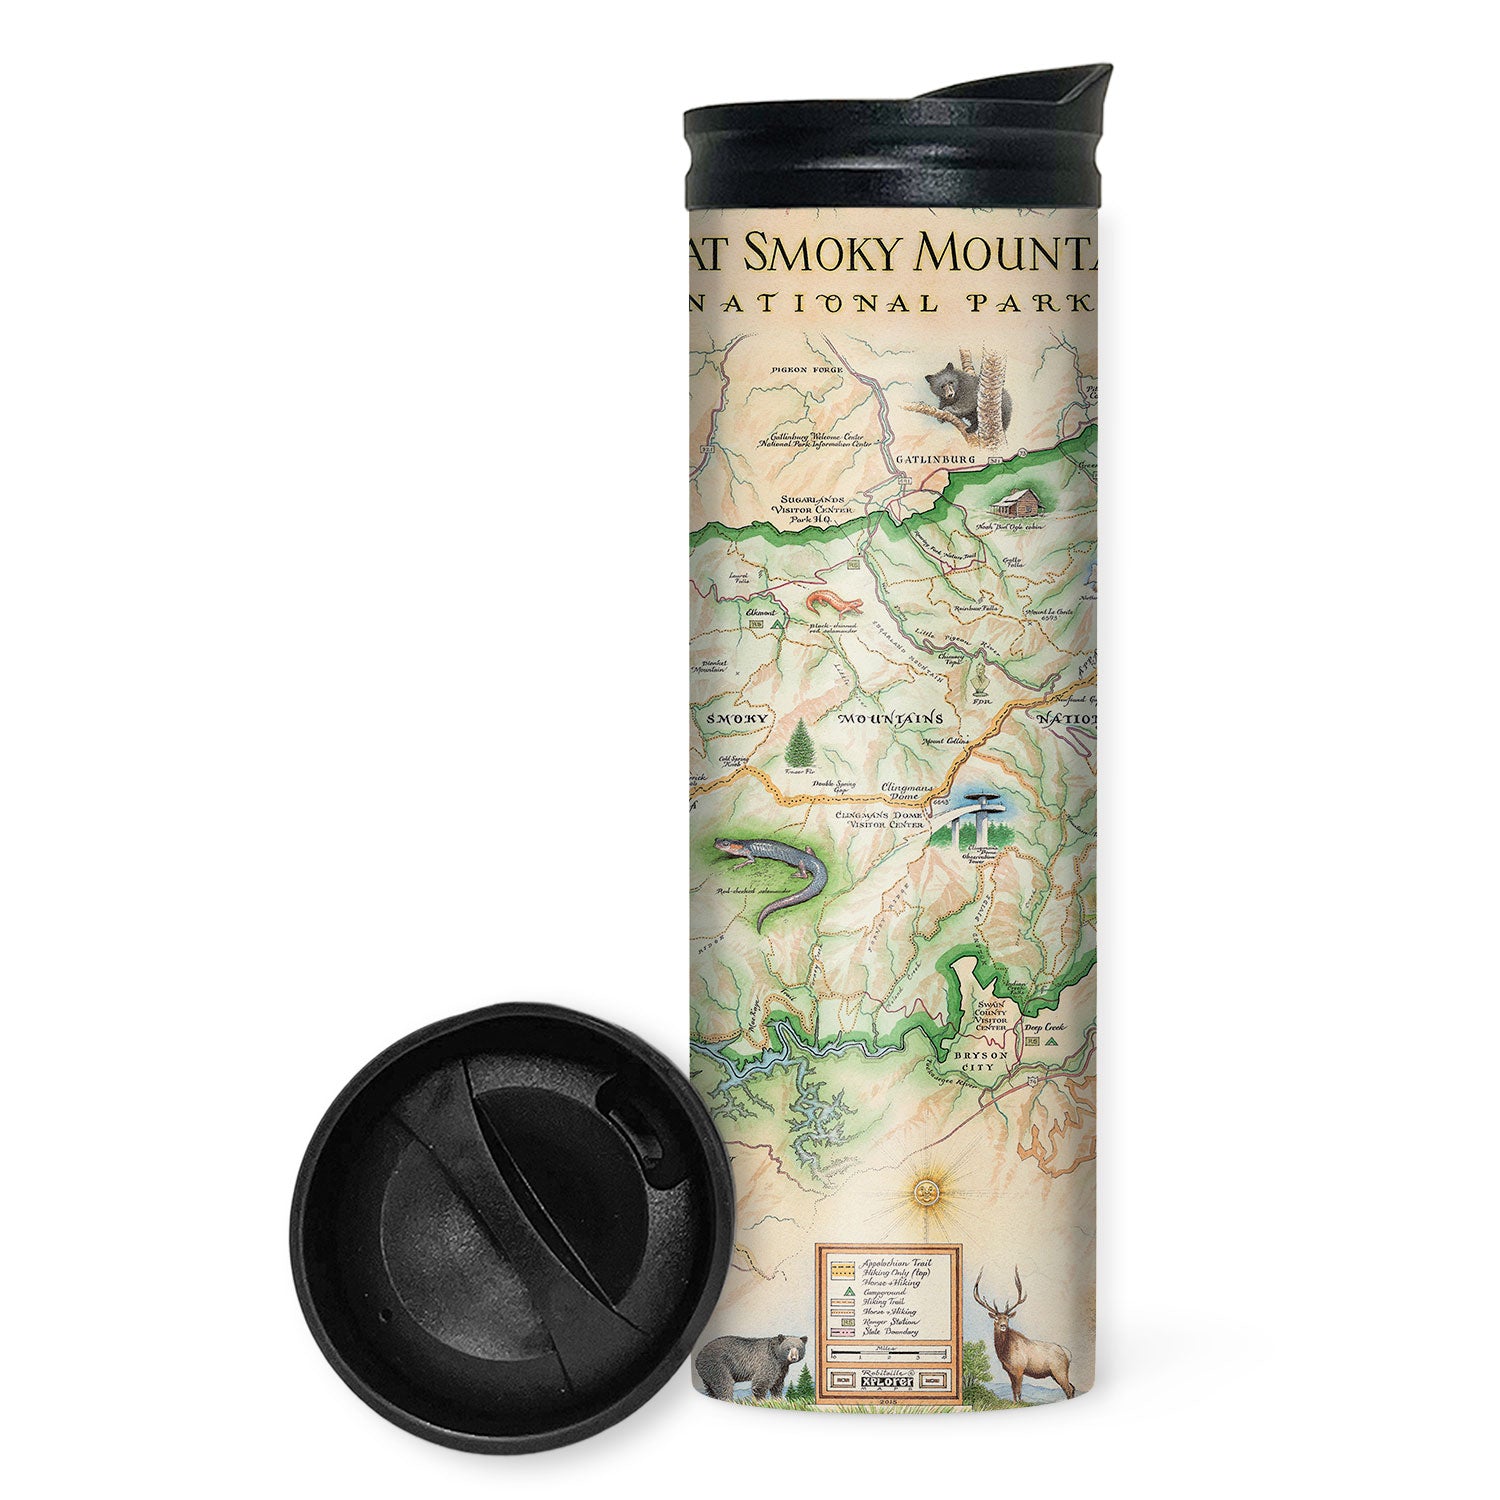 Great Smoky Mountains National Park Map travel drinkware by Xplorer Maps. The map depicts the entire National Park on the border of North Carolina and Tennessee. It features illustrations of a salamander, woodpecker, Clingman's Dome, Sugarland's Visitor Center, and Oconoluftee Visitor Center. 